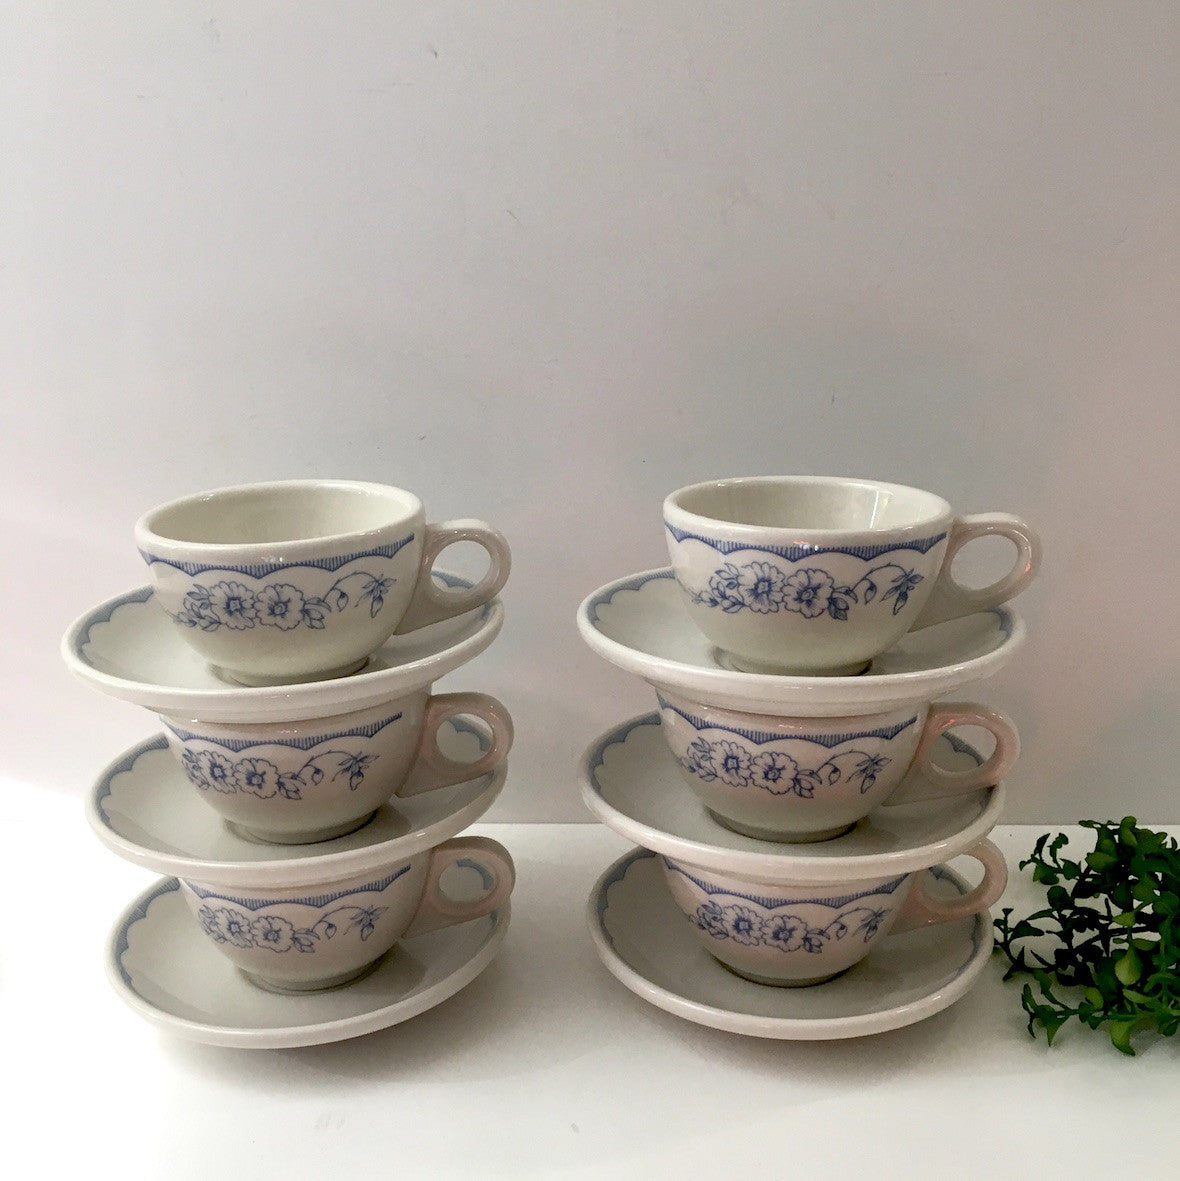 Vintage Set Homer Laughlin Diner Mugs, Best China White Ironstone 6 Oz.  Coffee Cups, Midcentury Heavy Restaurant Ware Espresso Cups, Teacups 